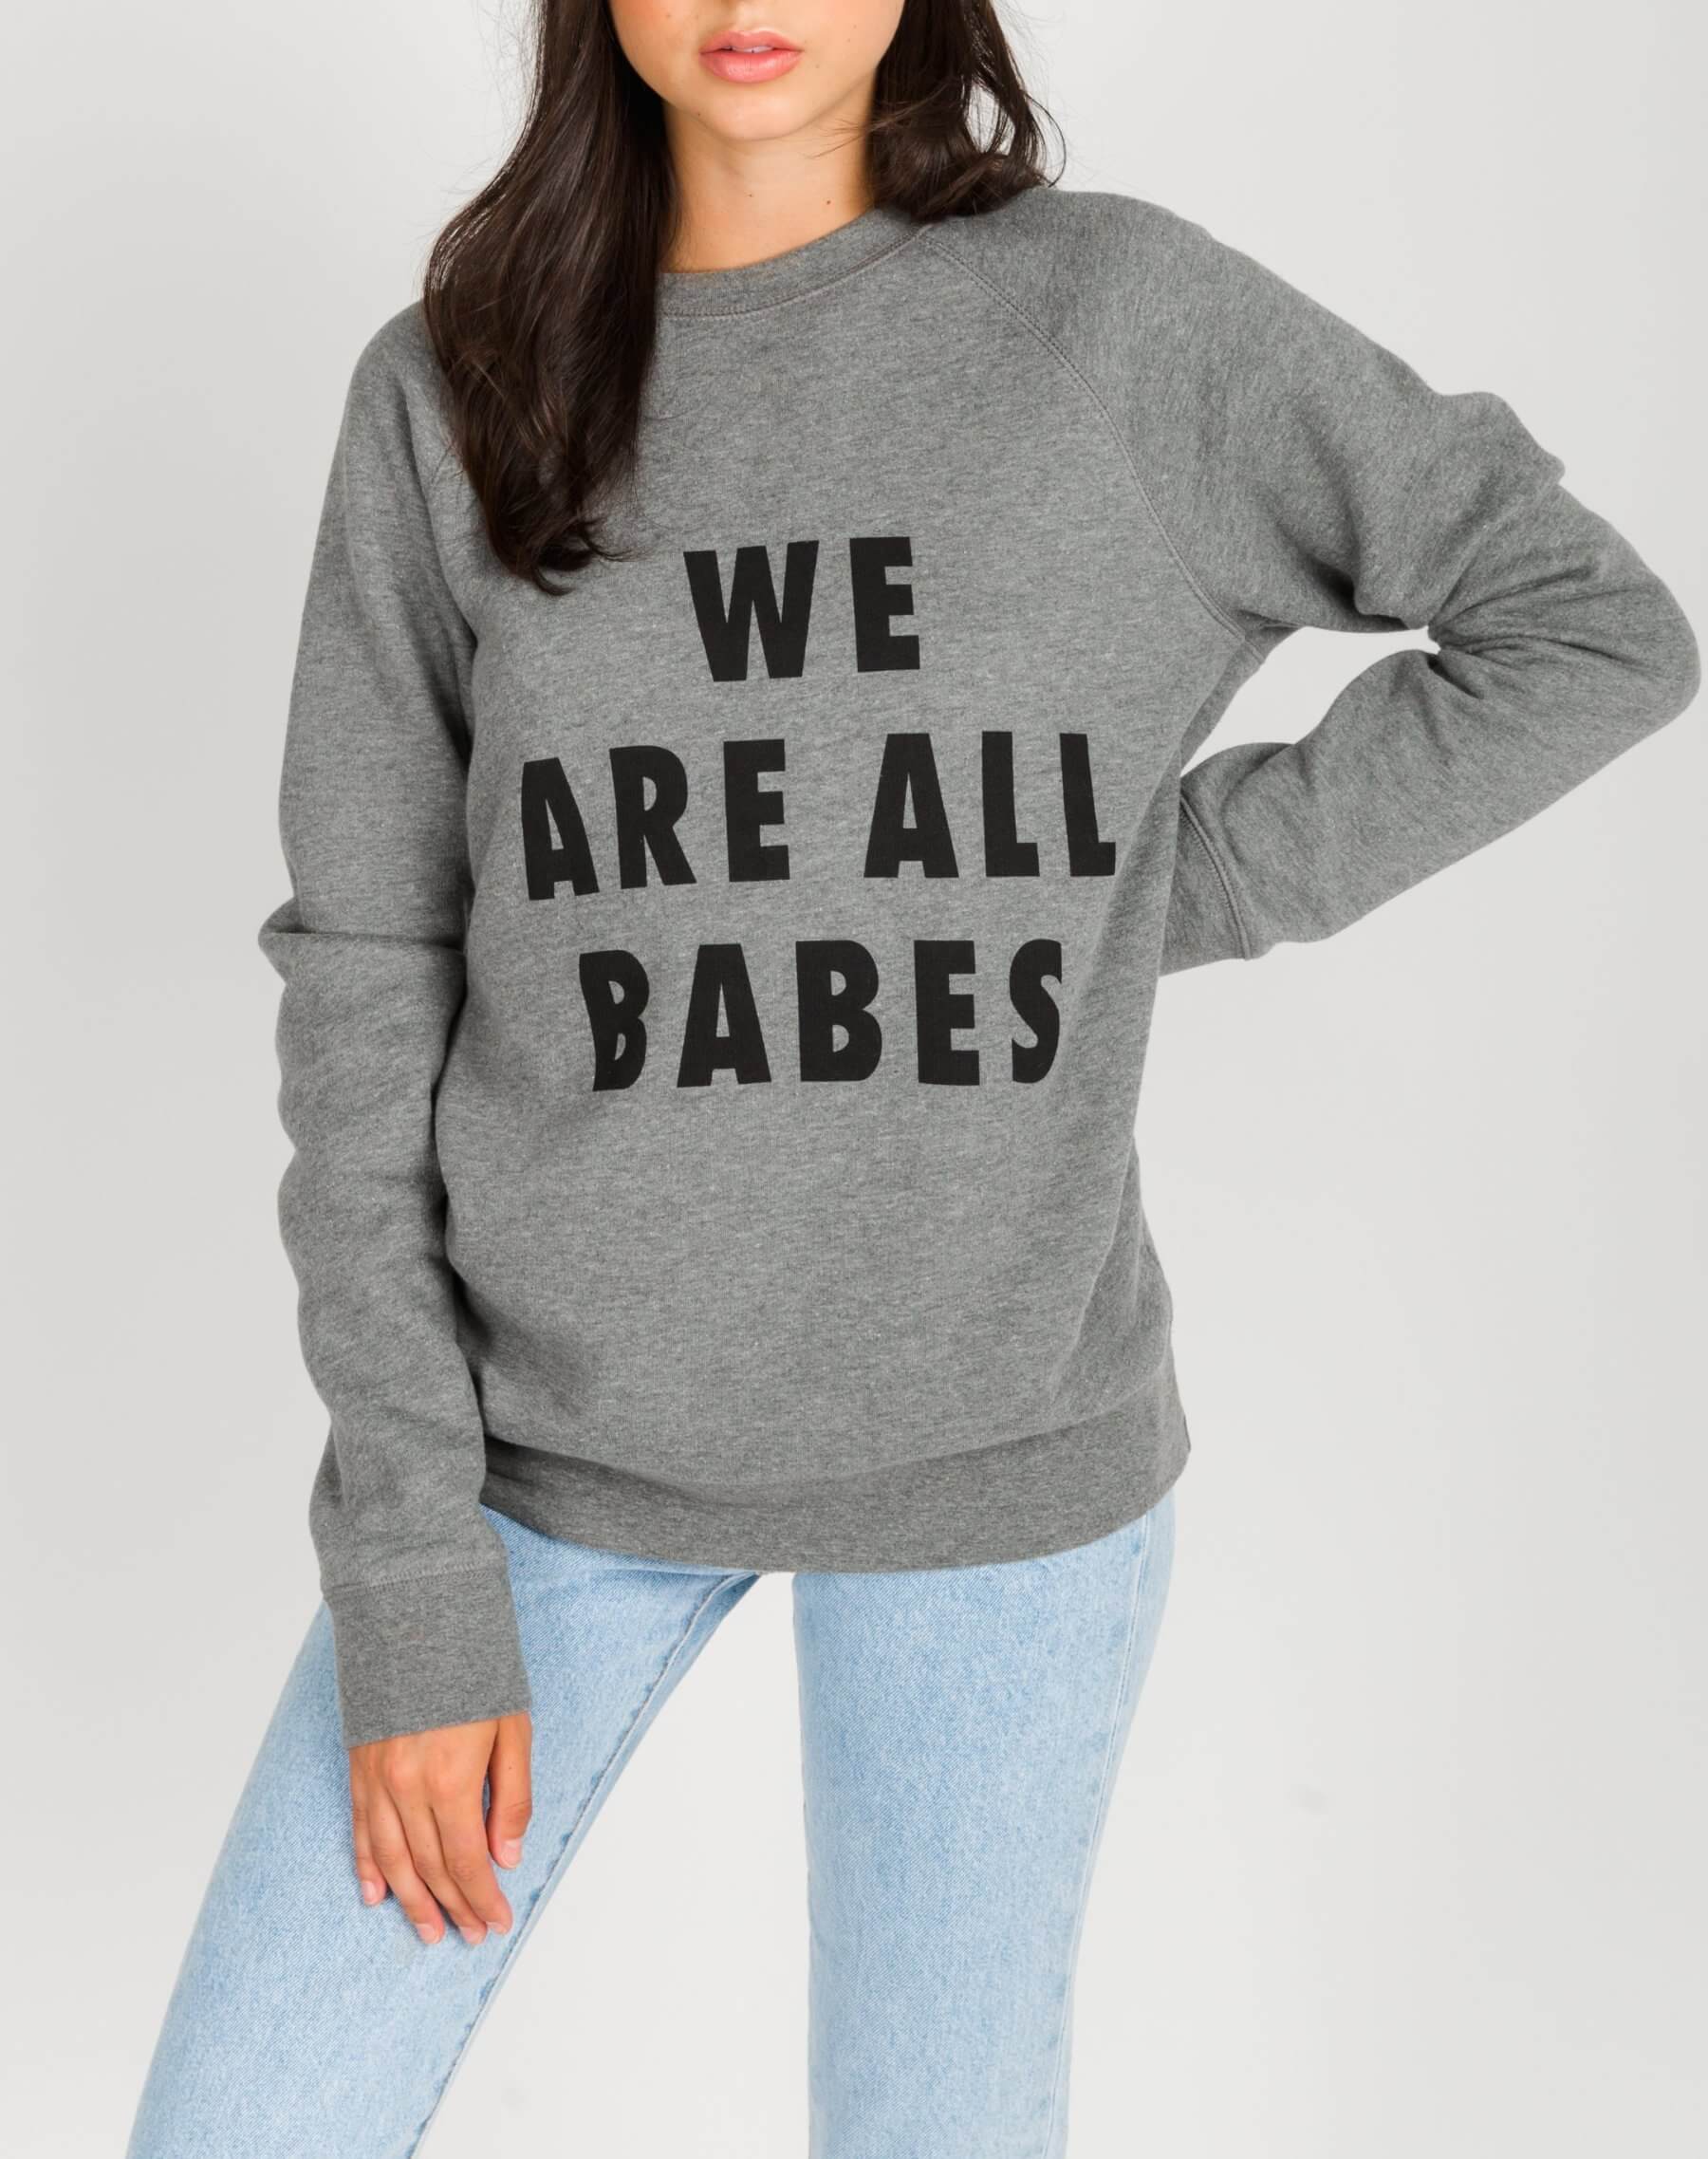 We Are All Babes sweatshirt